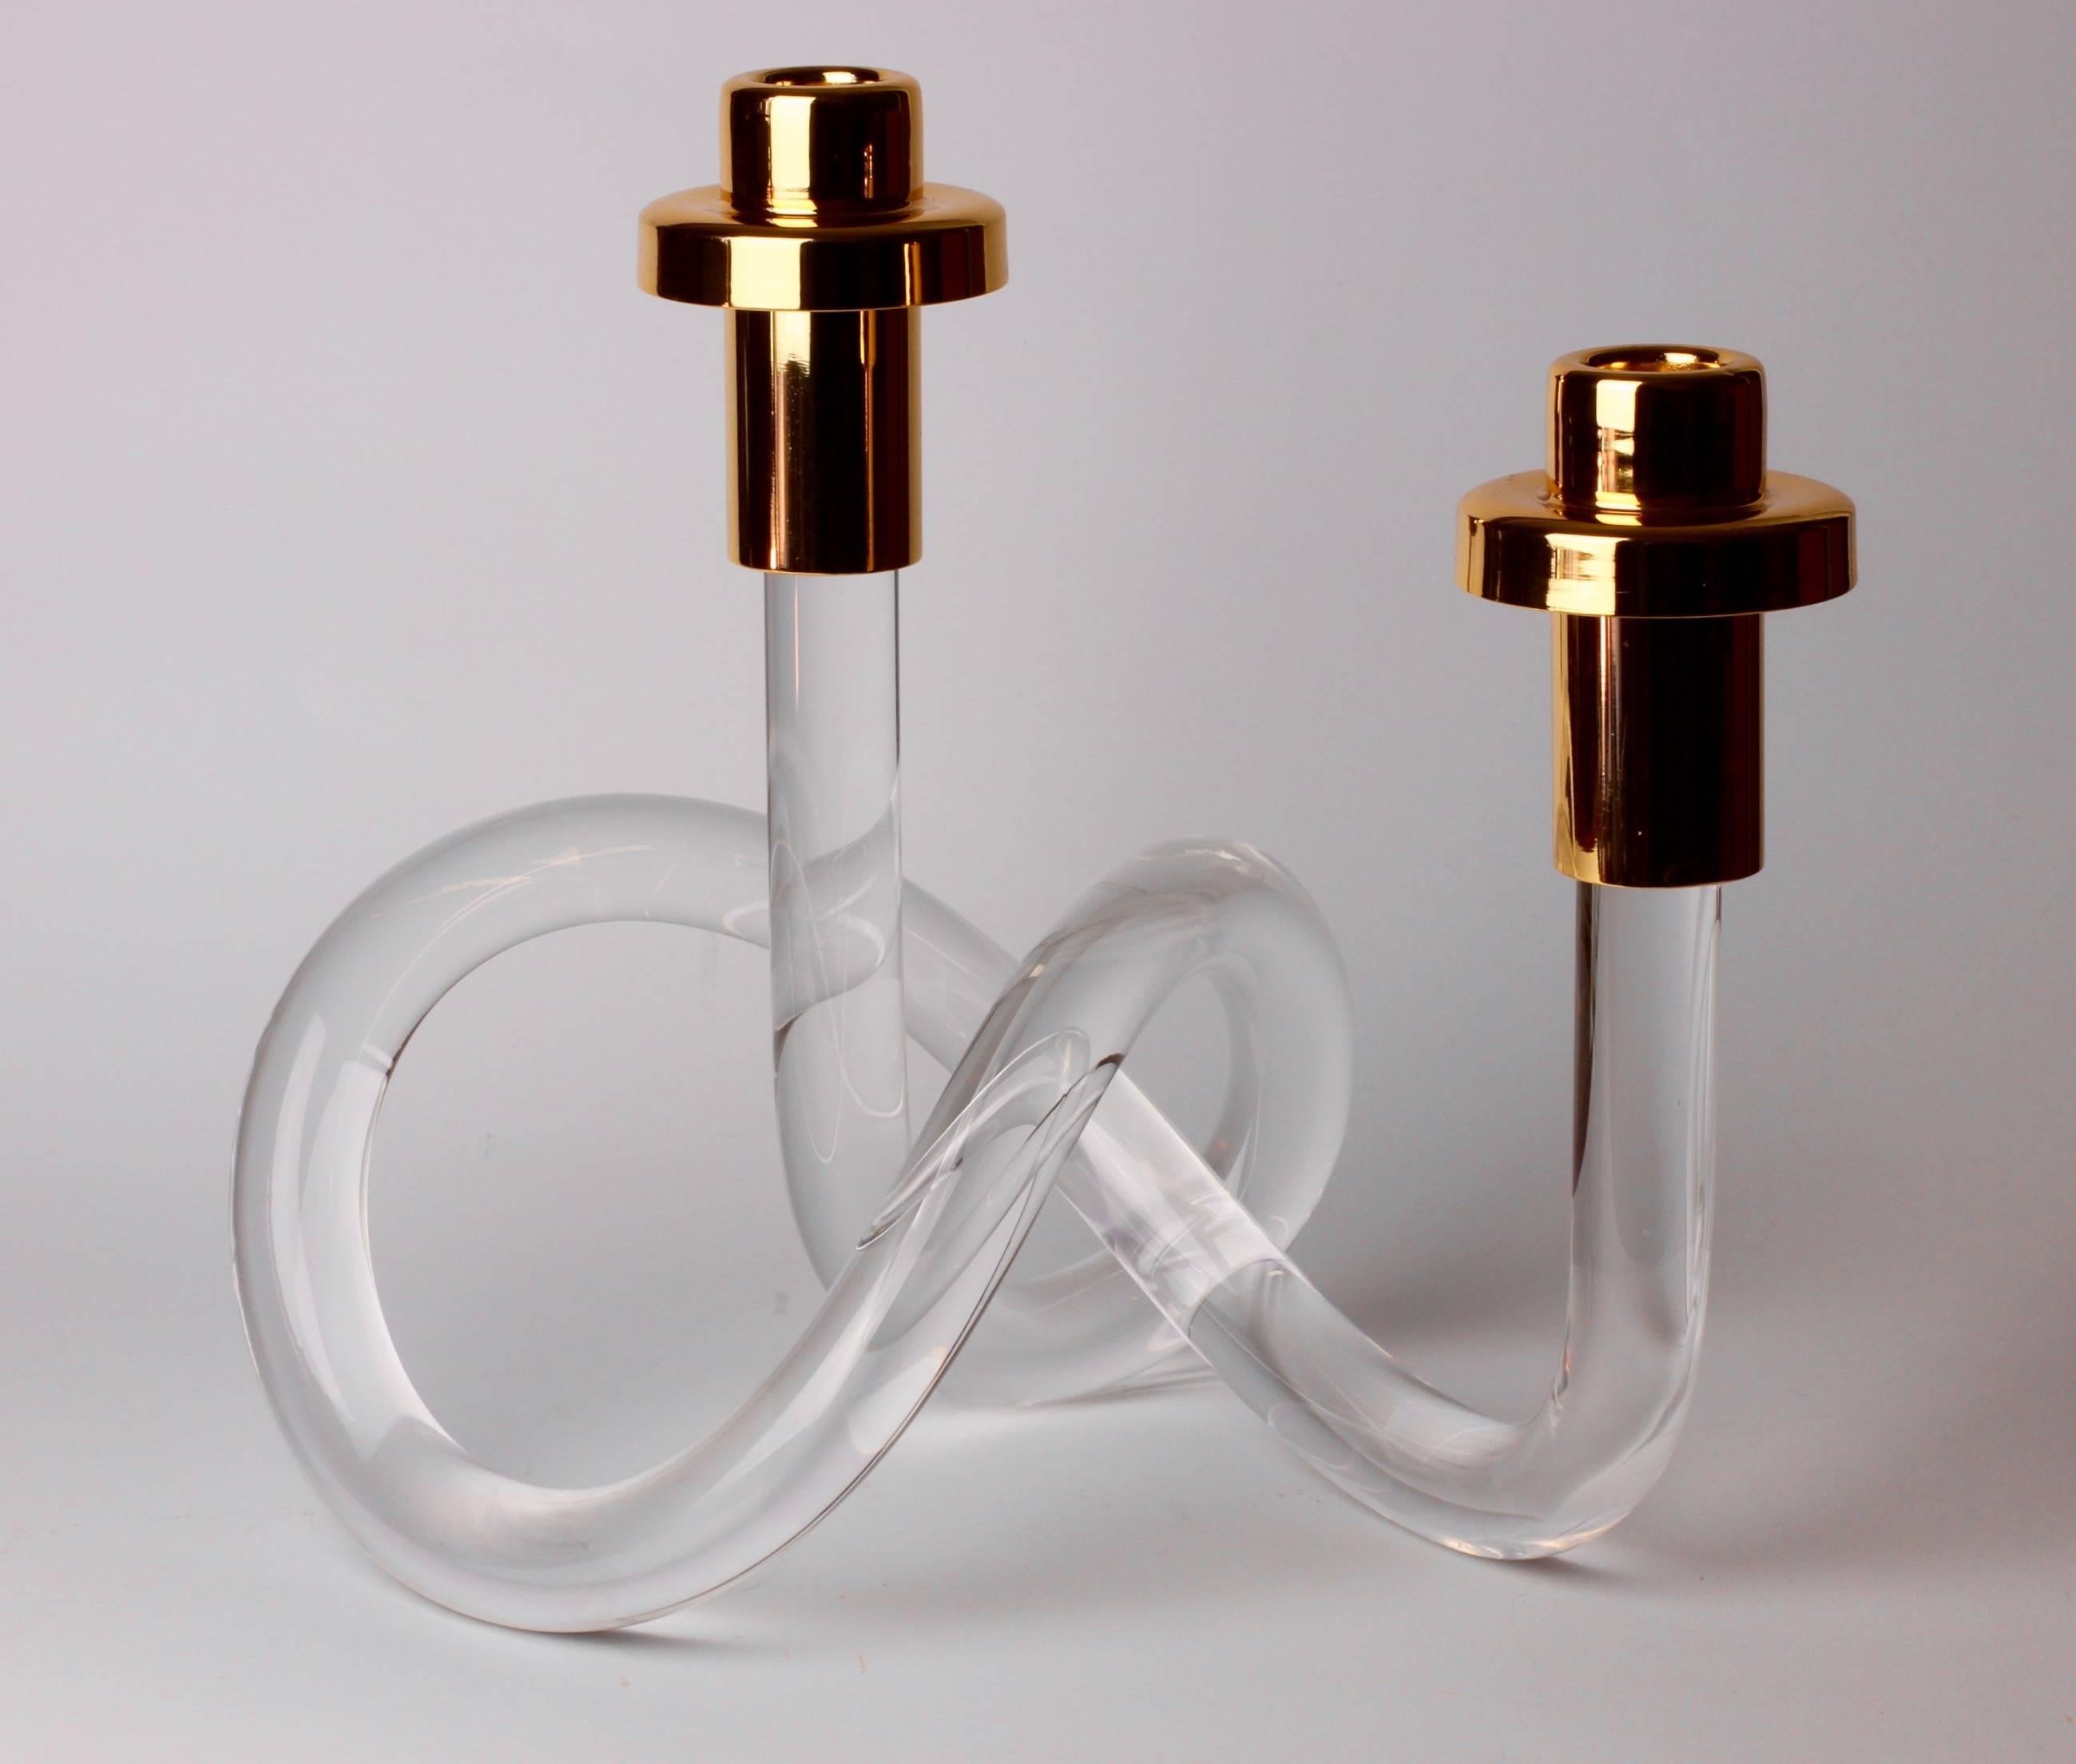 A Lucite and gold-plated brass double candlestick holder/candelabra by American designer Dorothy Thorpe, circa 1940s. With it's use of a single piece bent and twisted acrylic to form the whimsical base, it is often referred to as the 'pretzel'